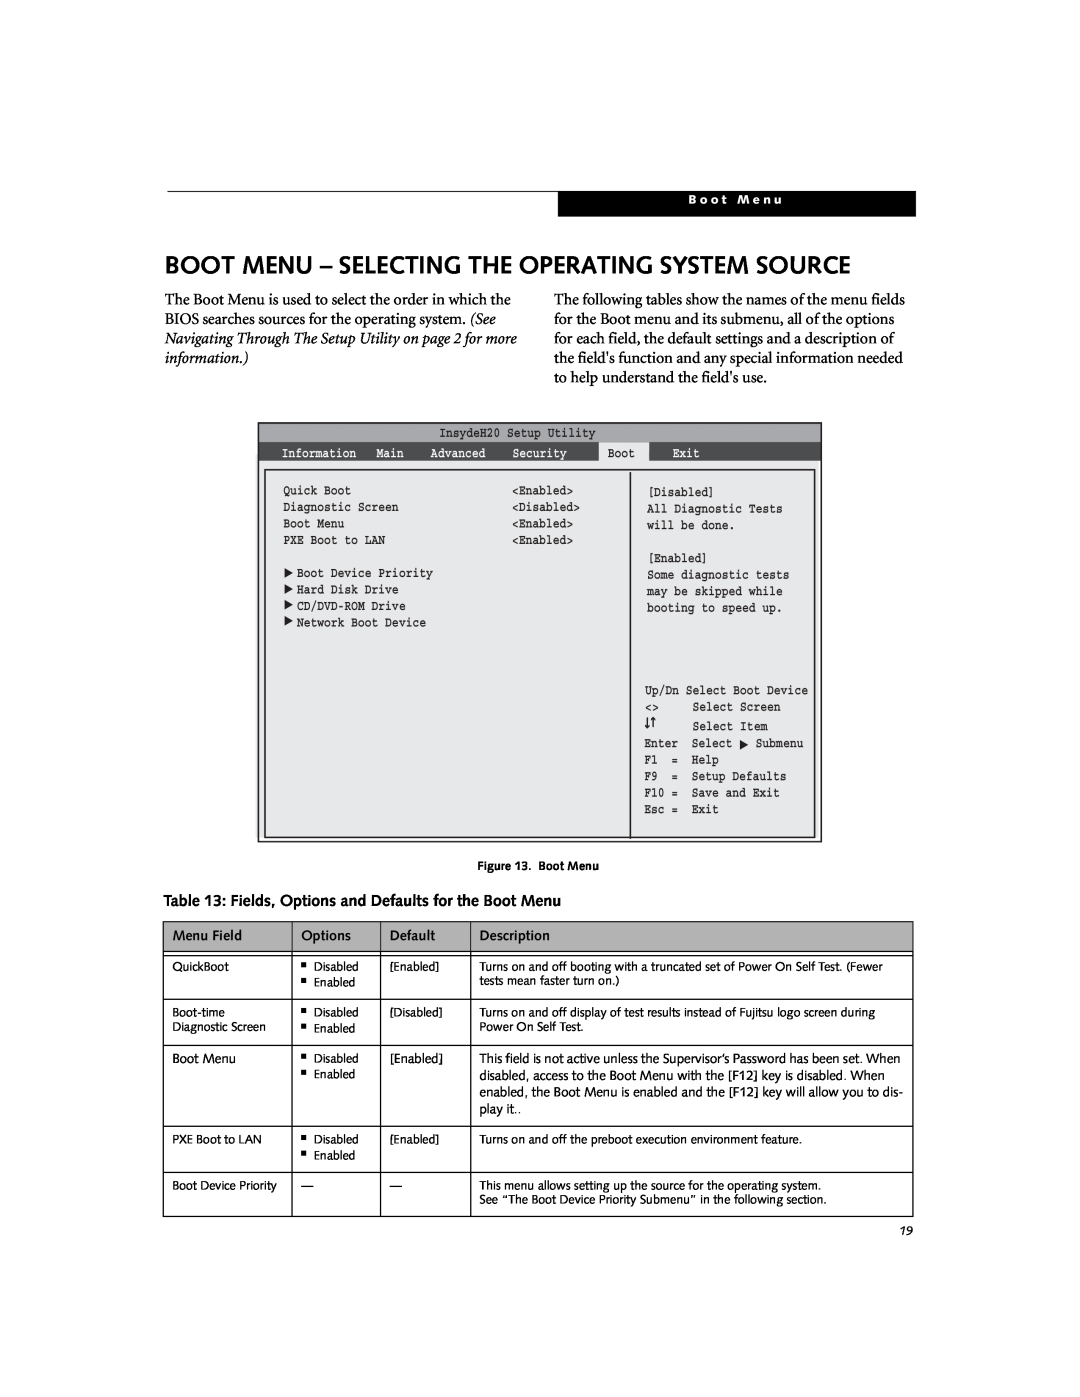 Fujitsu N3530 manual Boot Menu - Selecting The Operating System Source, Fields, Options and Defaults for the Boot Menu 